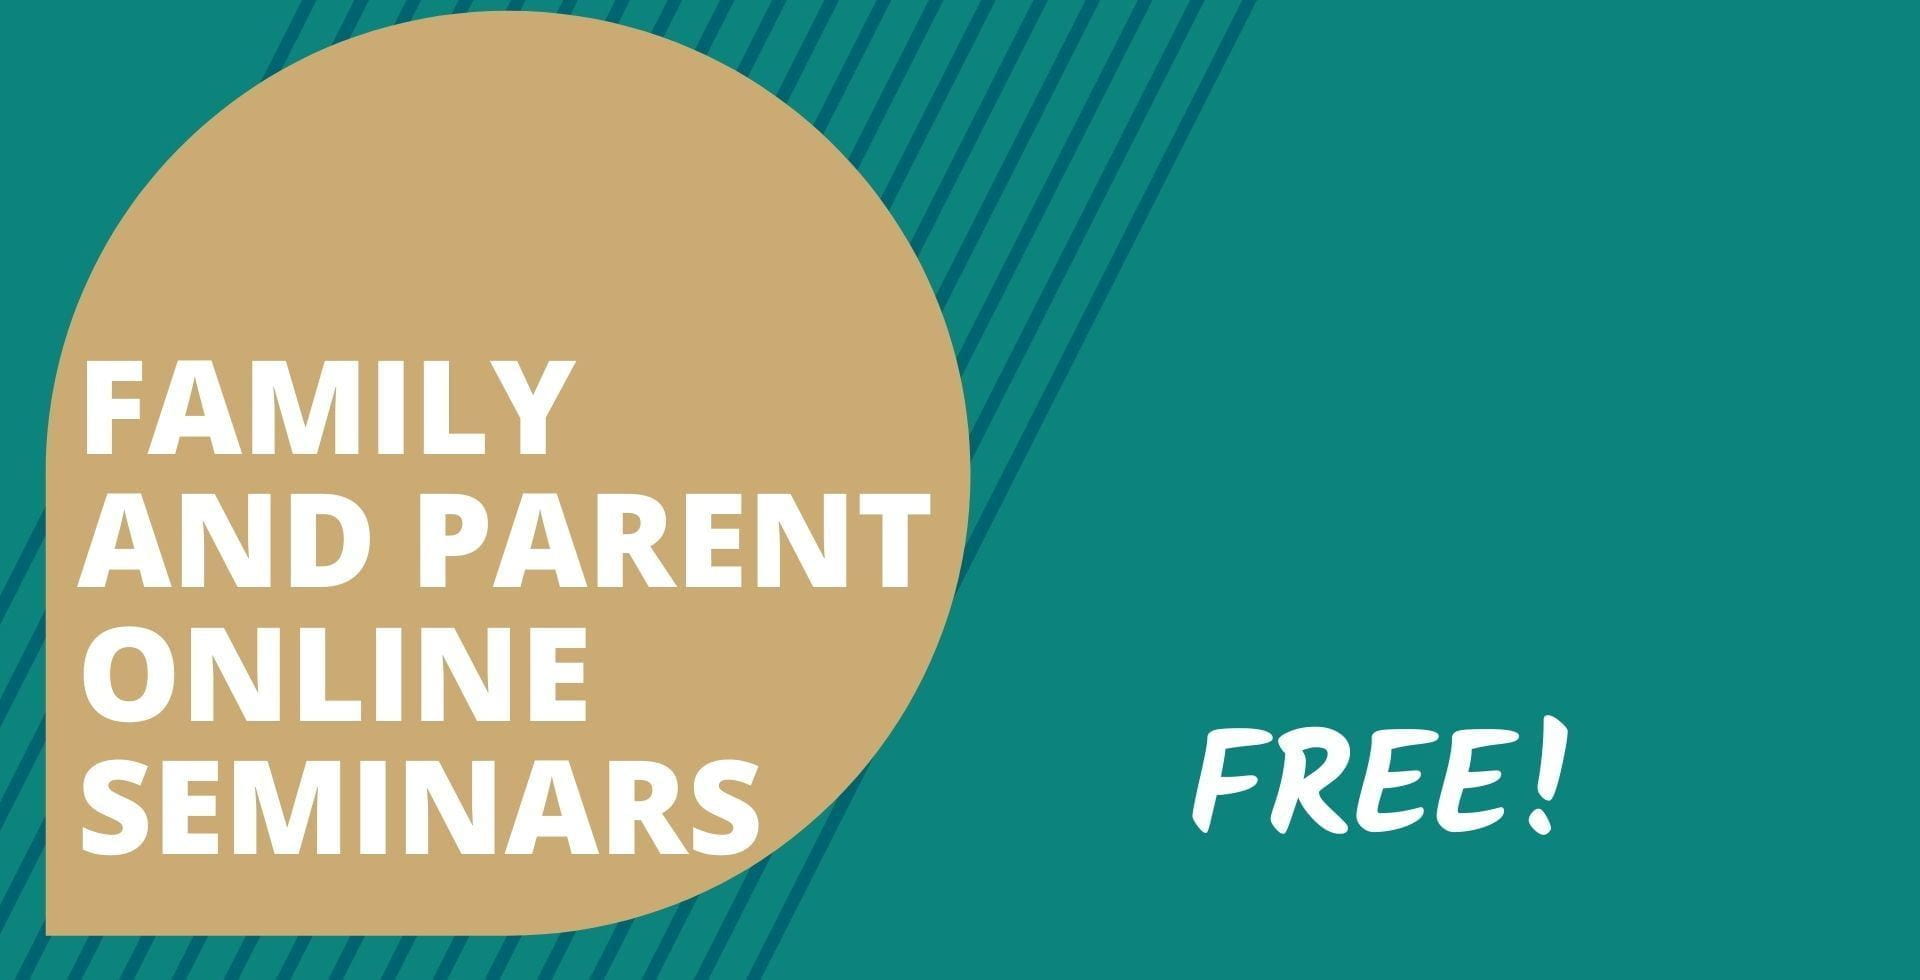 Family and Parent online seminars. Free!